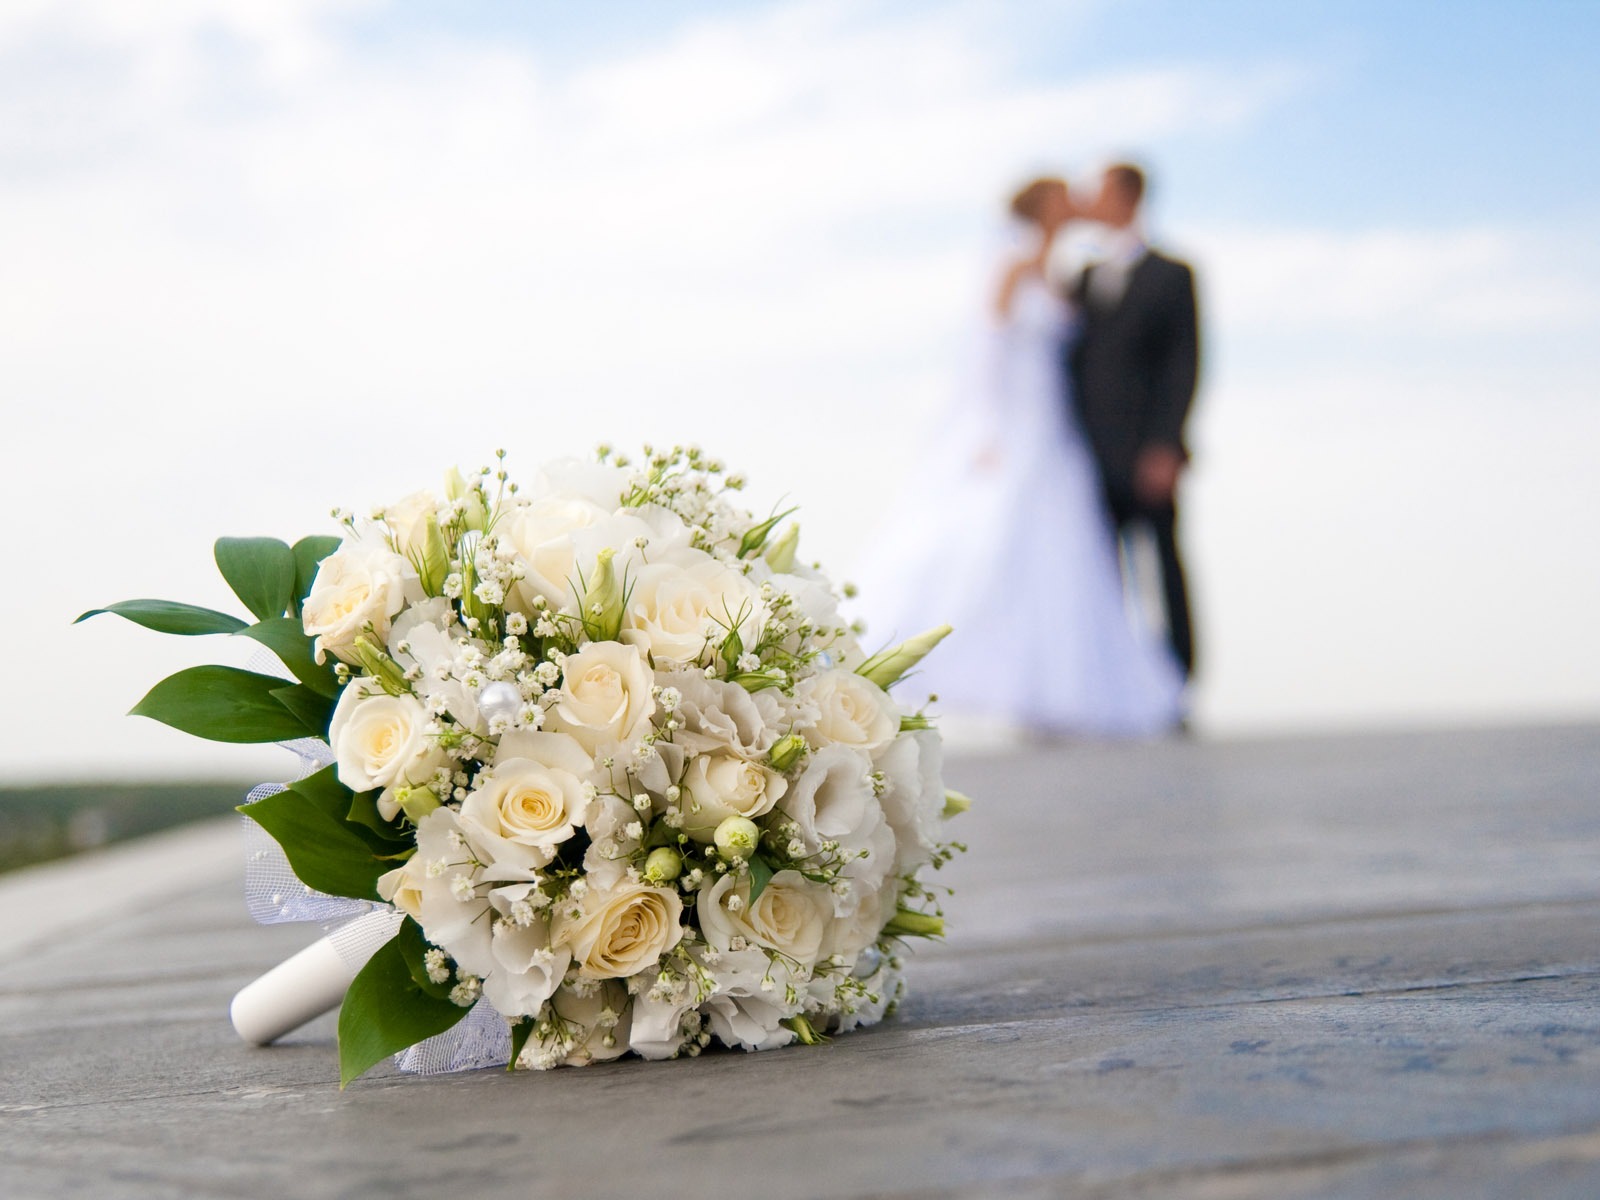 Weddings and Flowers wallpaper (2) #18 - 1600x1200